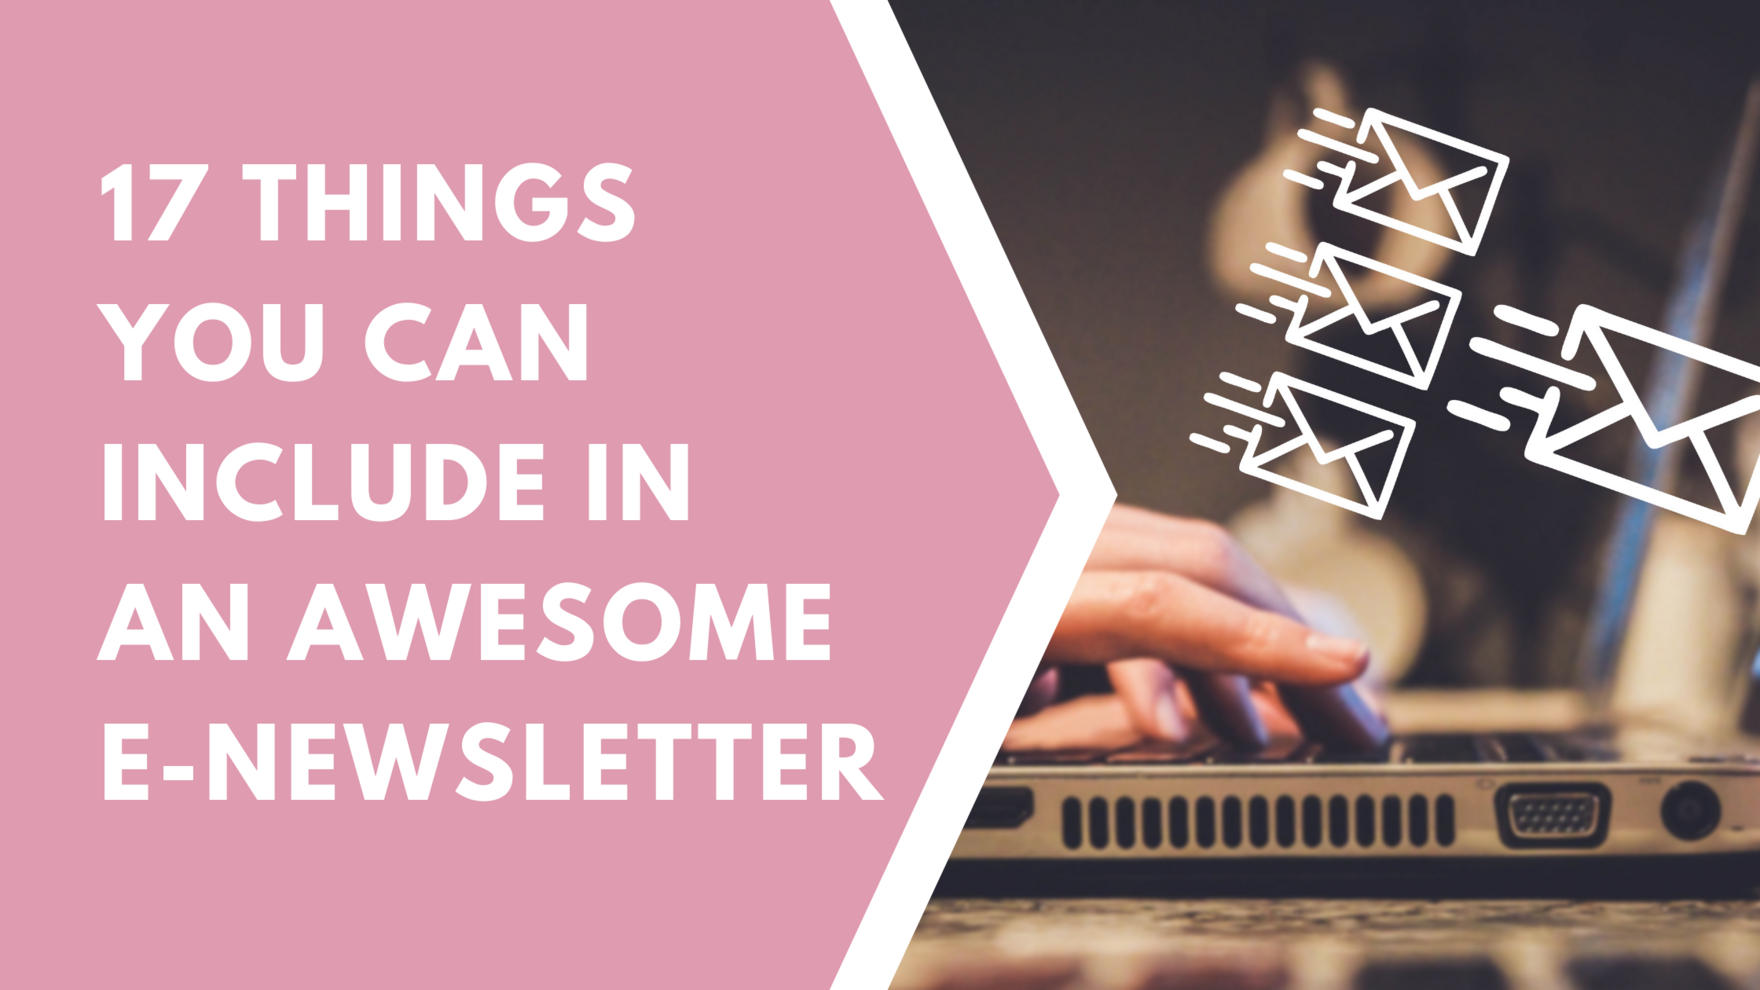 17 THINGS  YOU CAN INCLUDE IN  AN AWESOME  E-NEWSLETTER